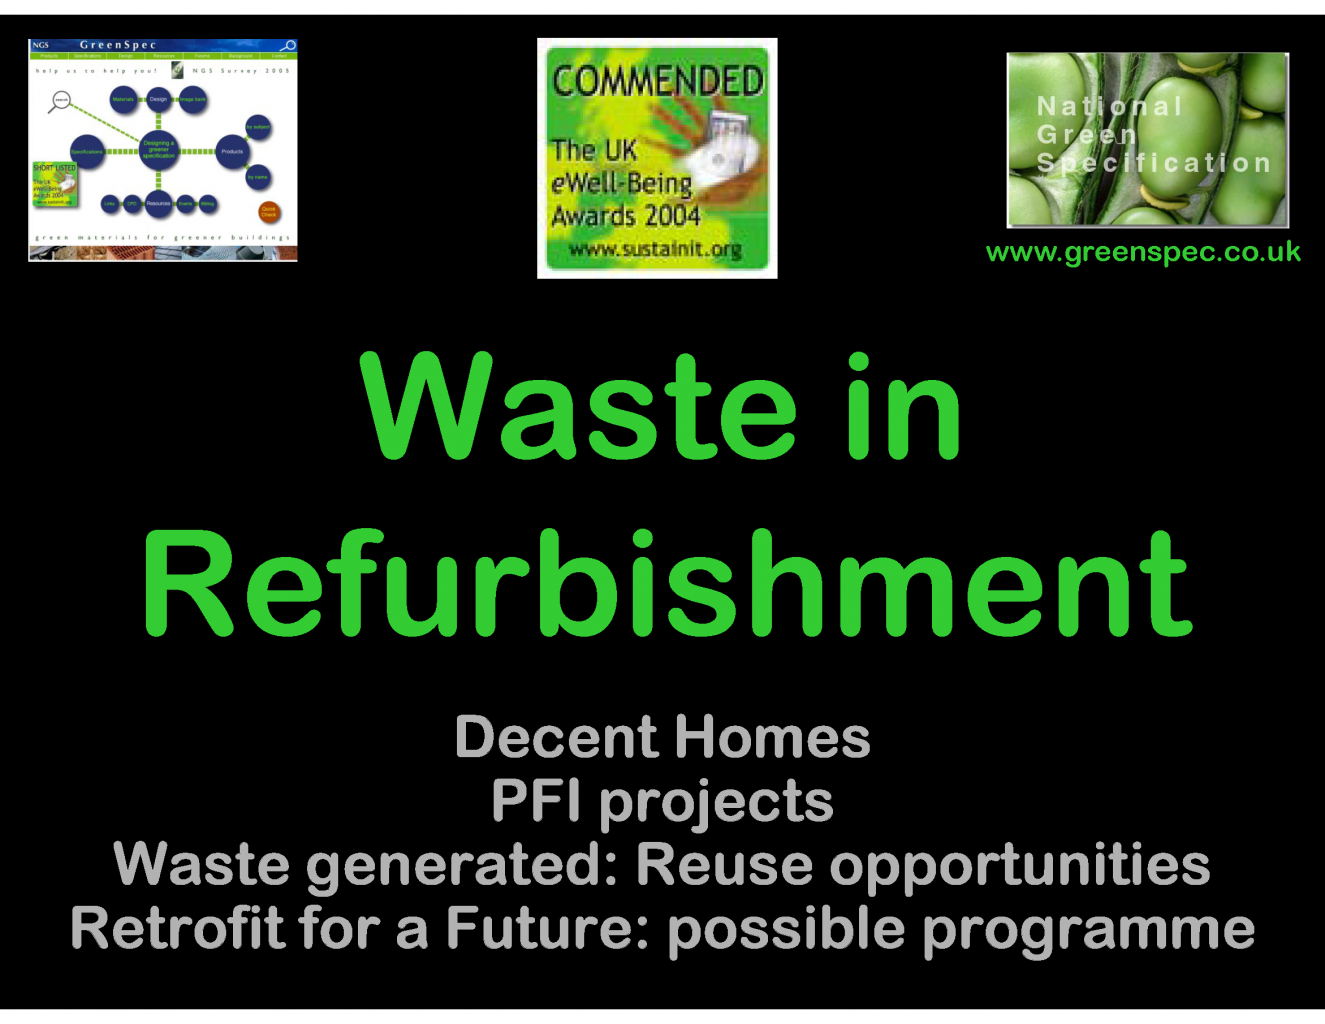 WasteSegRefurb, Recycled Content Building Products Site Waste Minimisation (Event) G#187